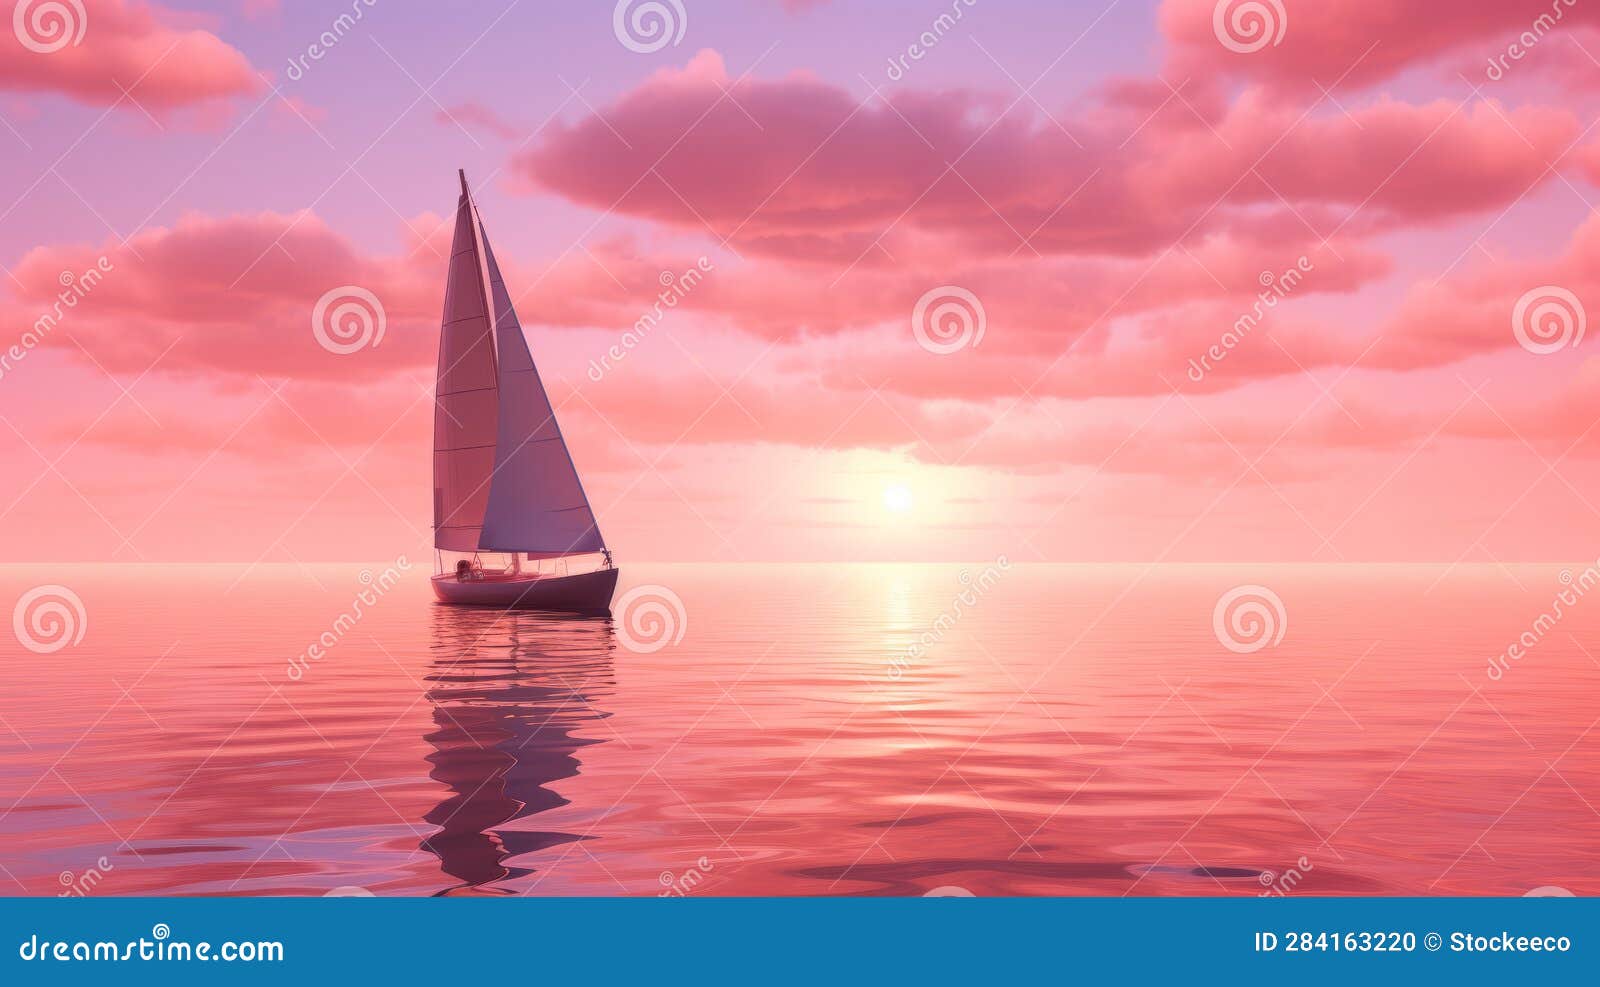 Romantic Pink Sailboat Sailing at Sunset on a Dreamy Pink Sky Stock ...